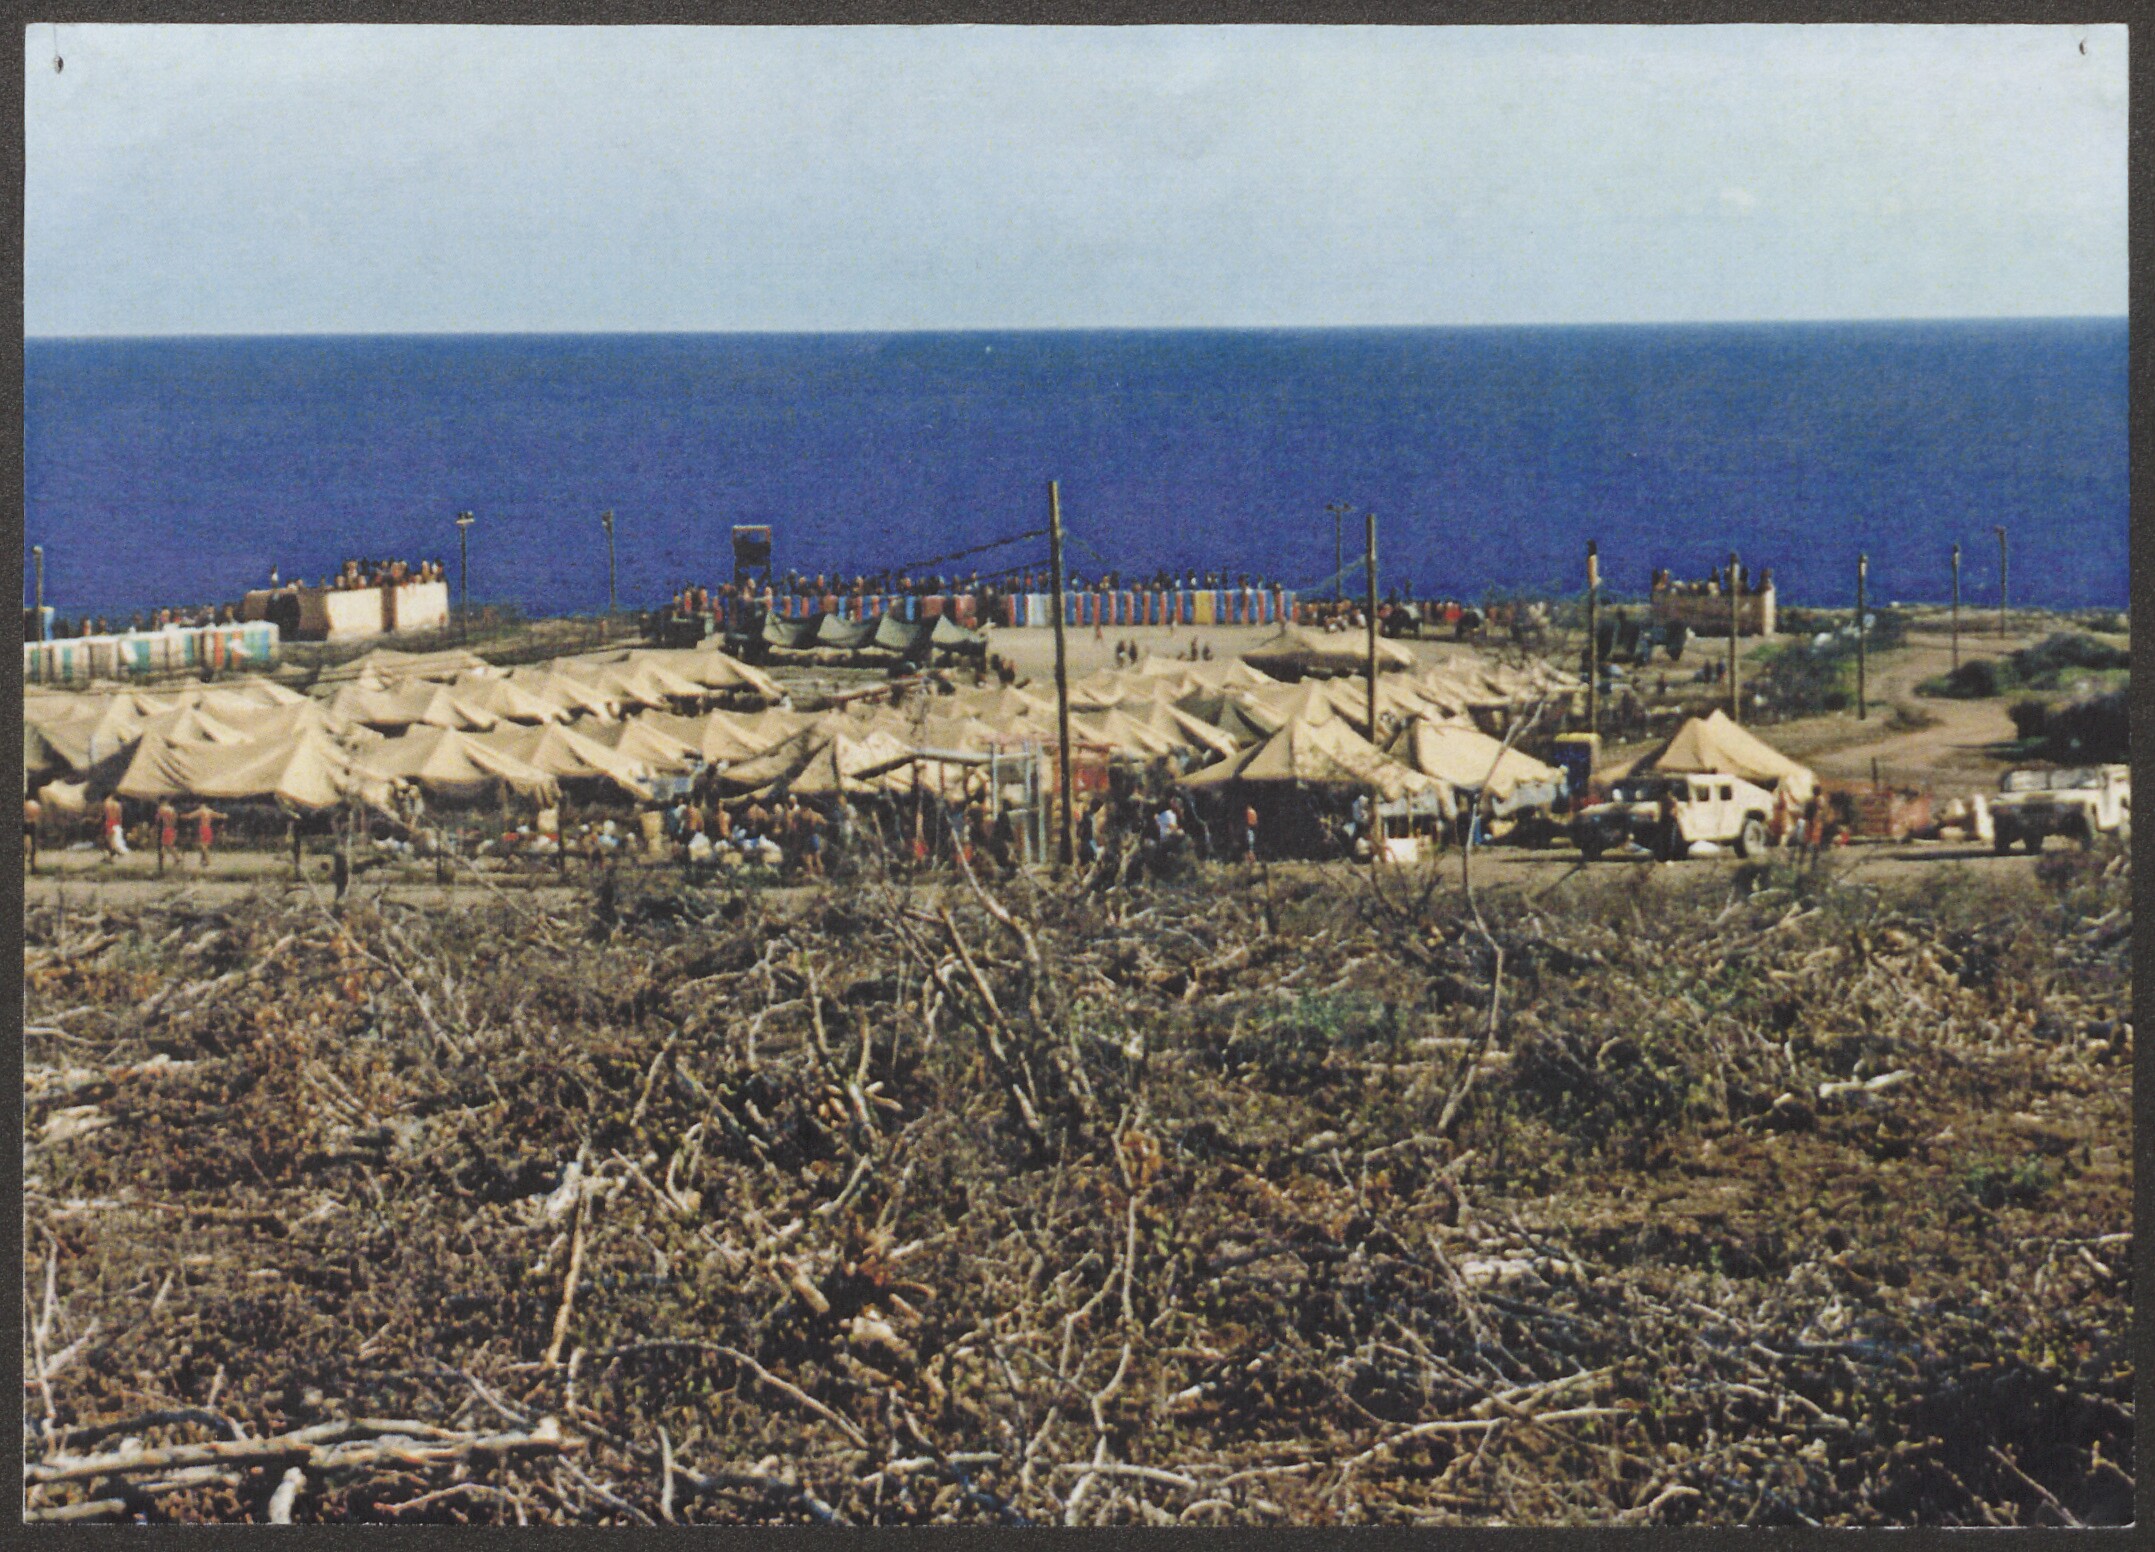 An overview of a Cuban camp in Guantánamo, 1994